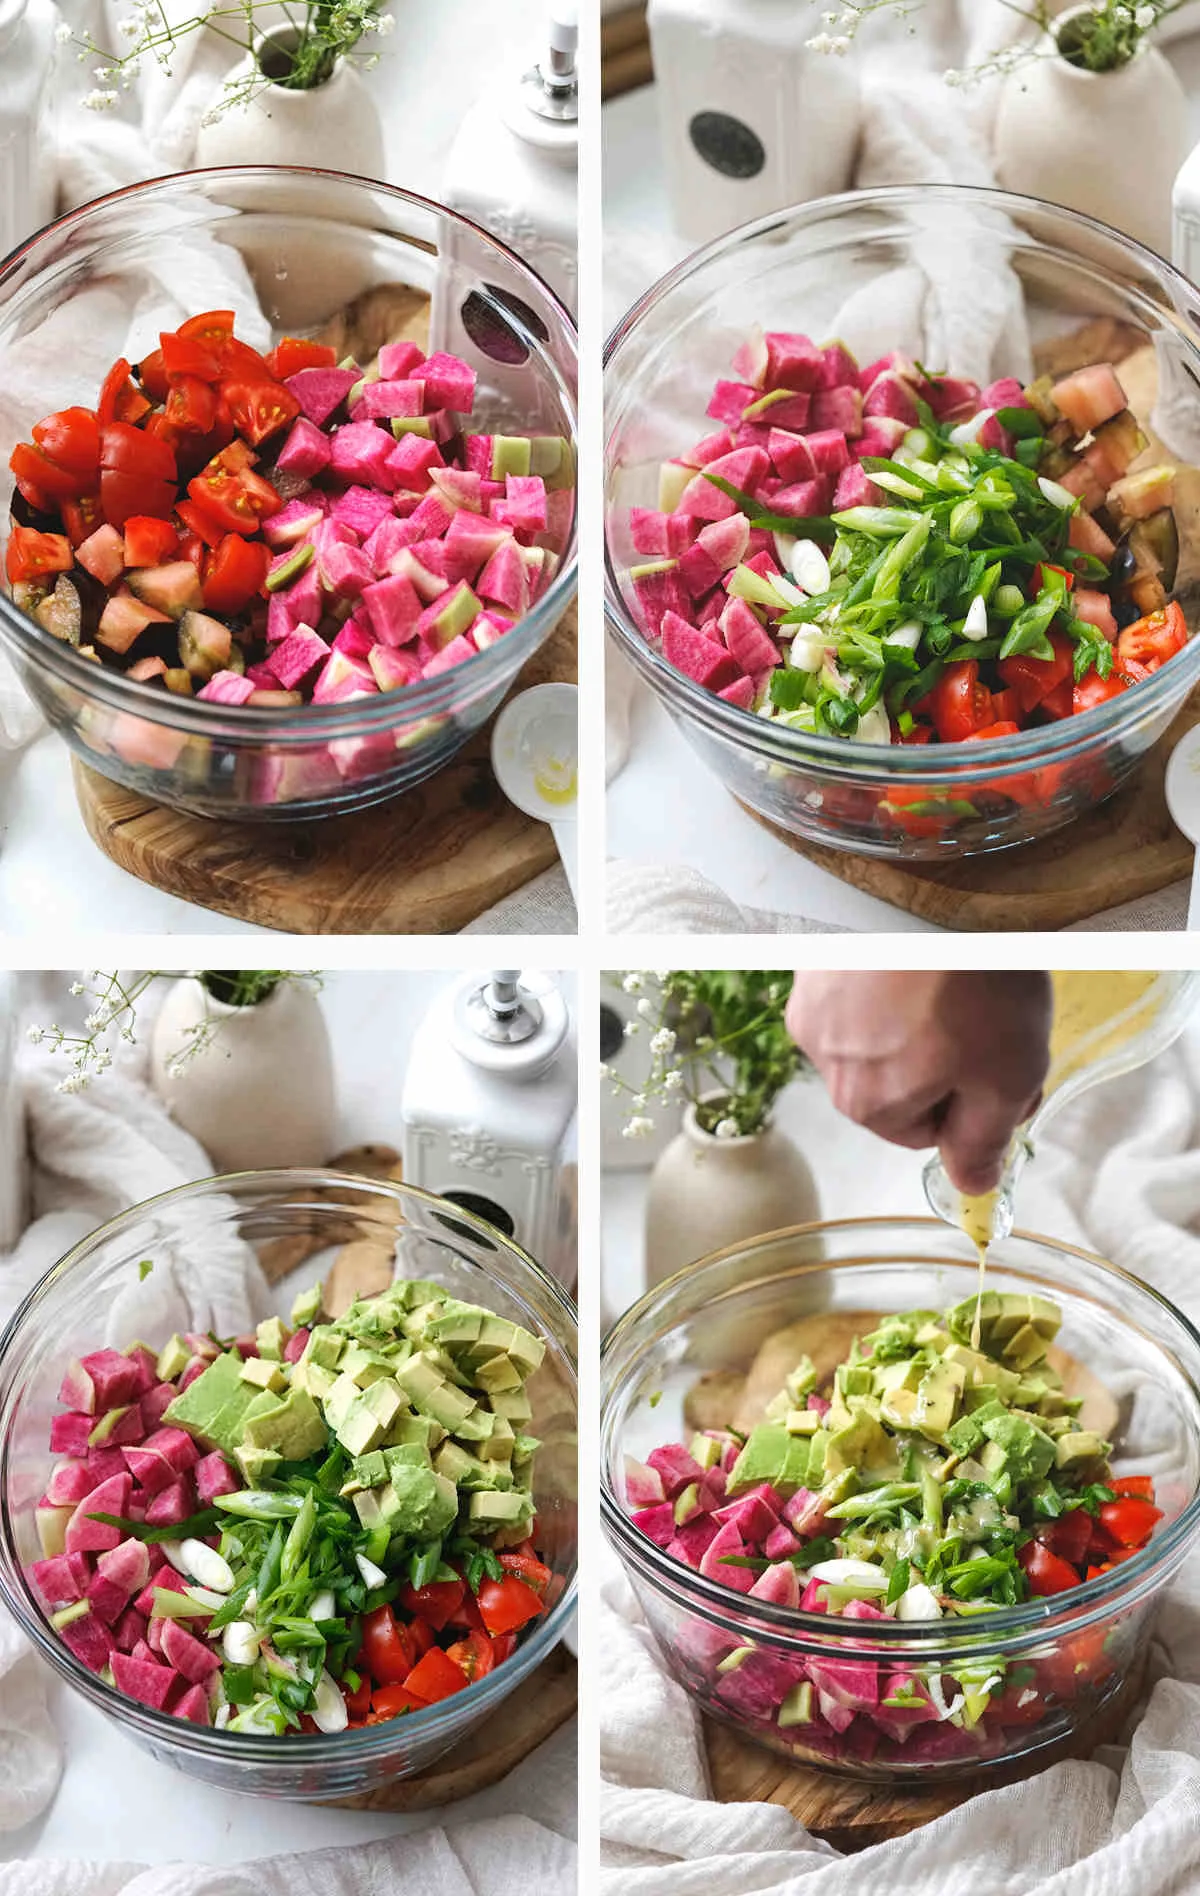 Instruction steps to make the watermelon radish salad in a bowl.